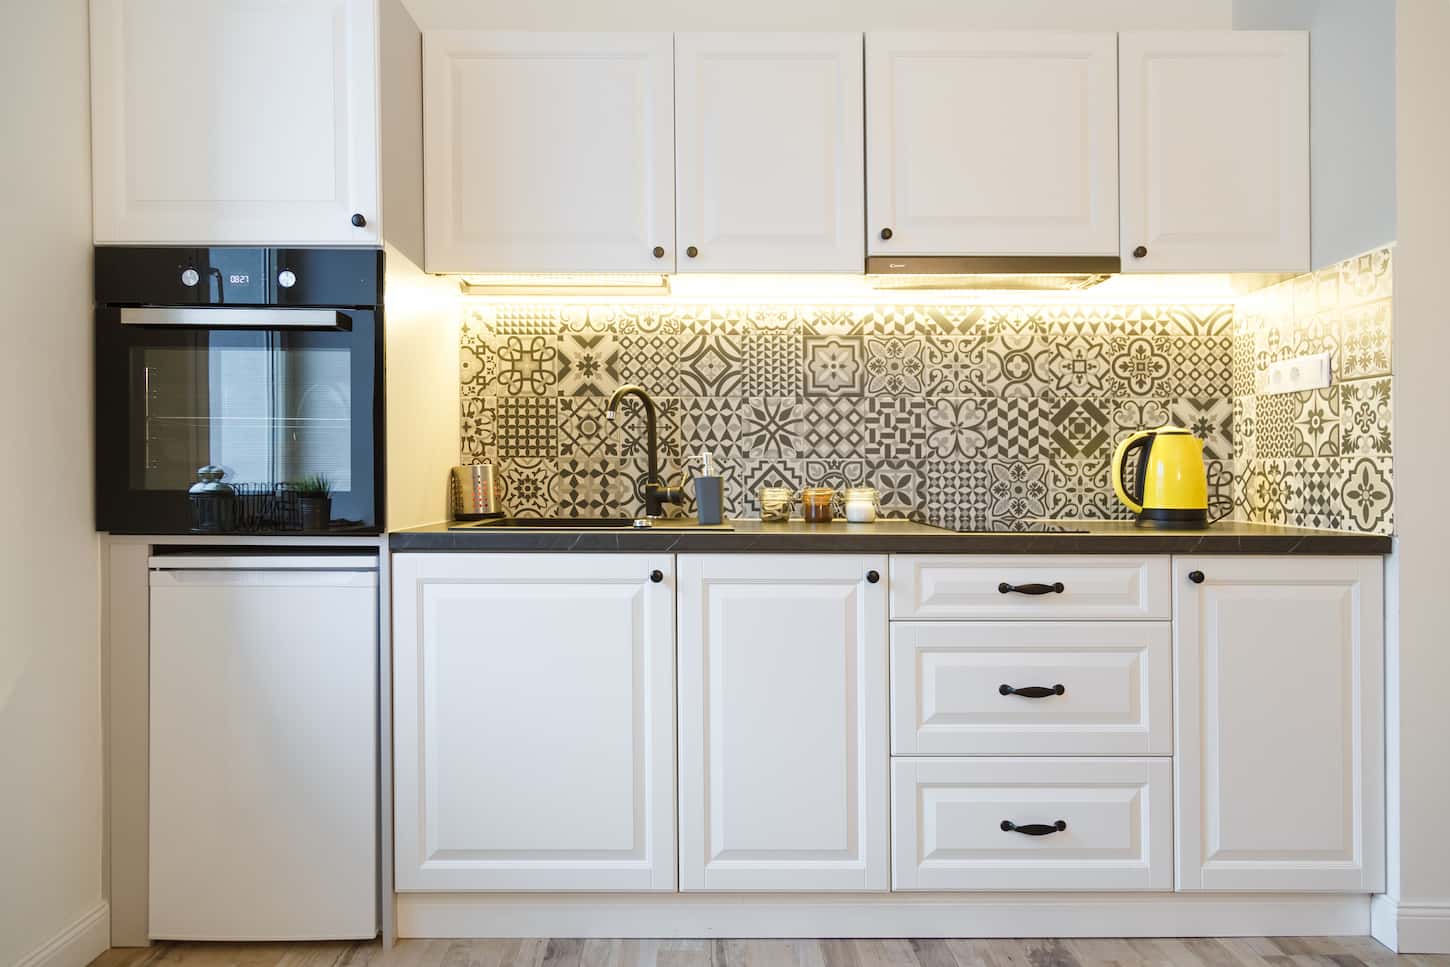 An image of a Beautiful home kitchen with white cabinets and backlight.